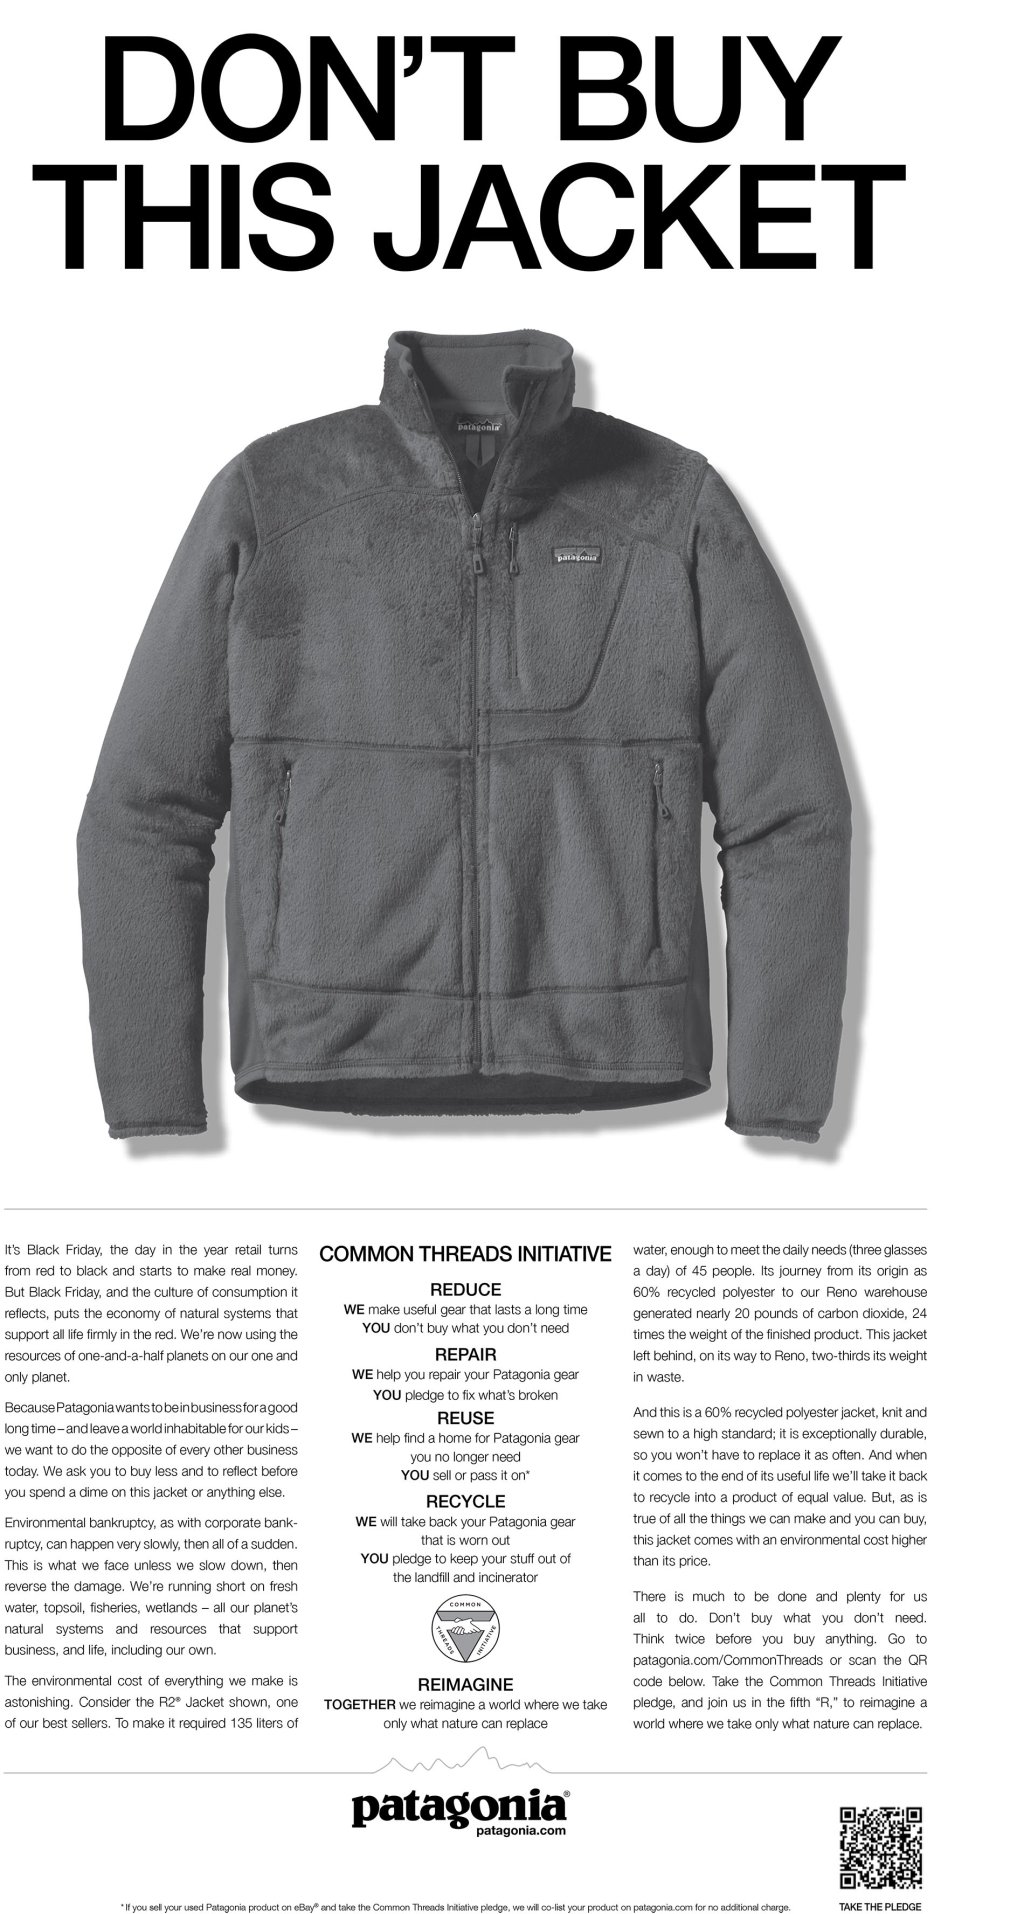 Patagonia ad for Black Friday 2011